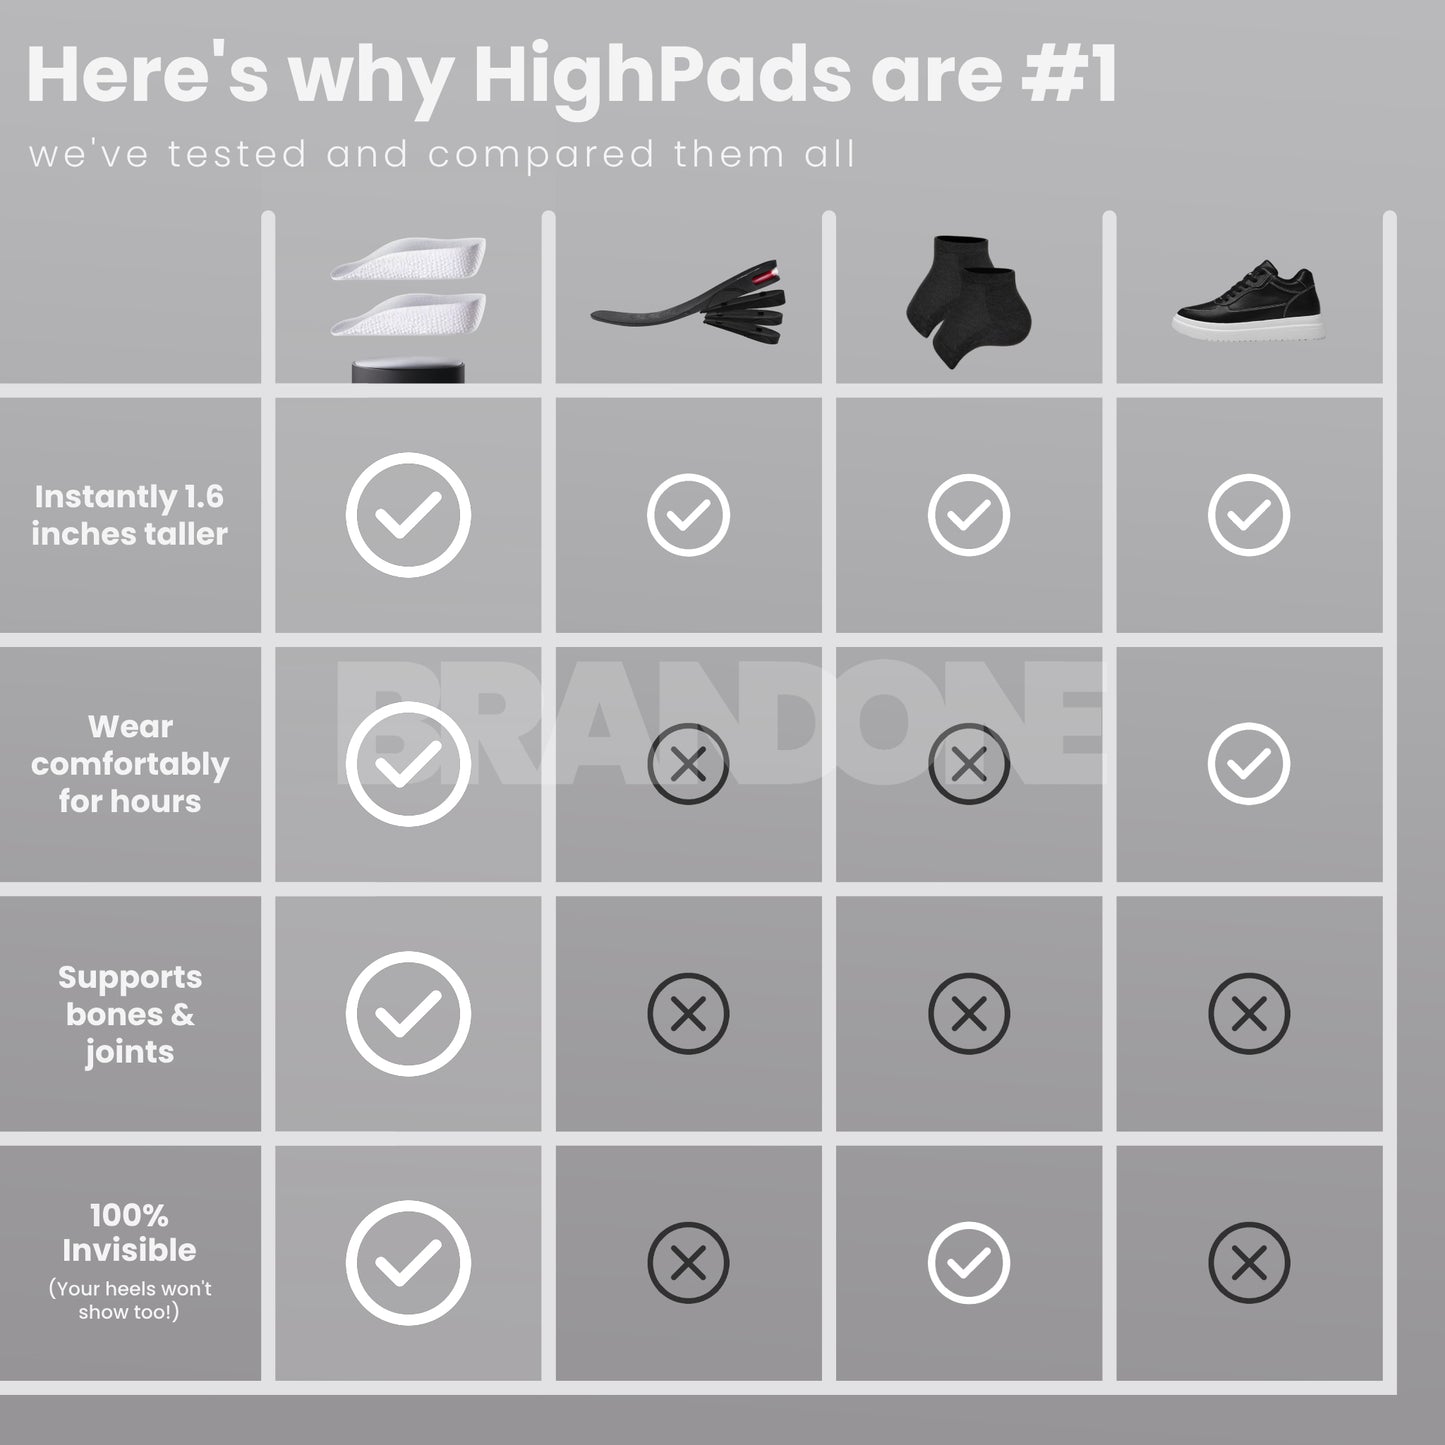 Orthopedic HighPads 1.0, height increasing insoles, shoe lifts, elevator shoes, height boost insoles, taller insoles, height enhancing insoles, Orthopedic shoe inserts, height increasing inserts, tall insoles, shoe height enhancers, insoles for height, height adding insoles, Orthopedic shoe lifts, height boosting insoles, shoe height inserts, taller shoe inserts, height lift insoles, Orthopedic height insoles, height elevation insoles, shoe height boosters, insoles for extra height,